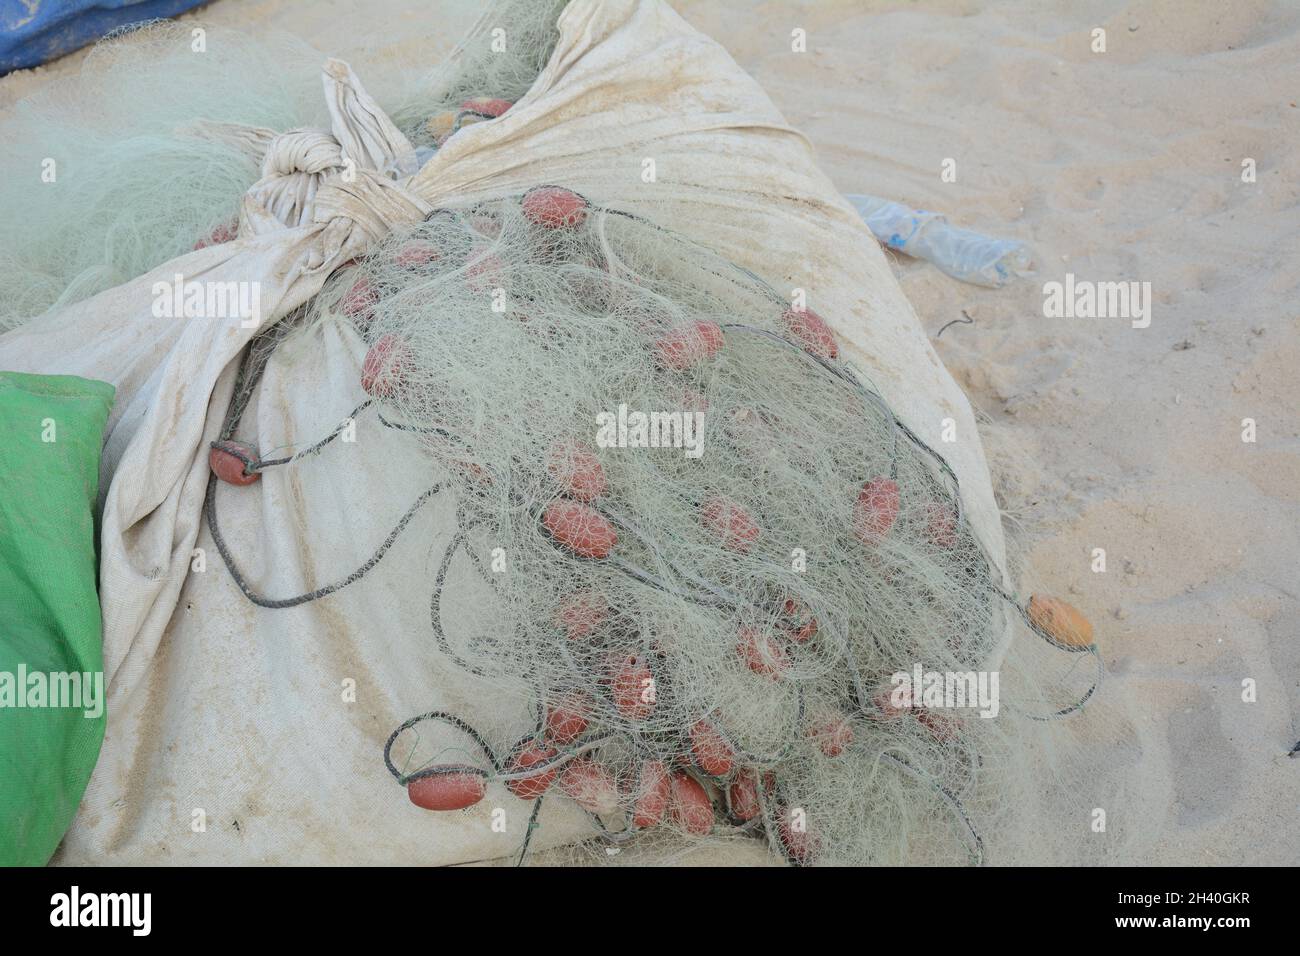 Fishing nets with buoys and ropes. Fishing nets ropes and floats on a harbor Stock Photo